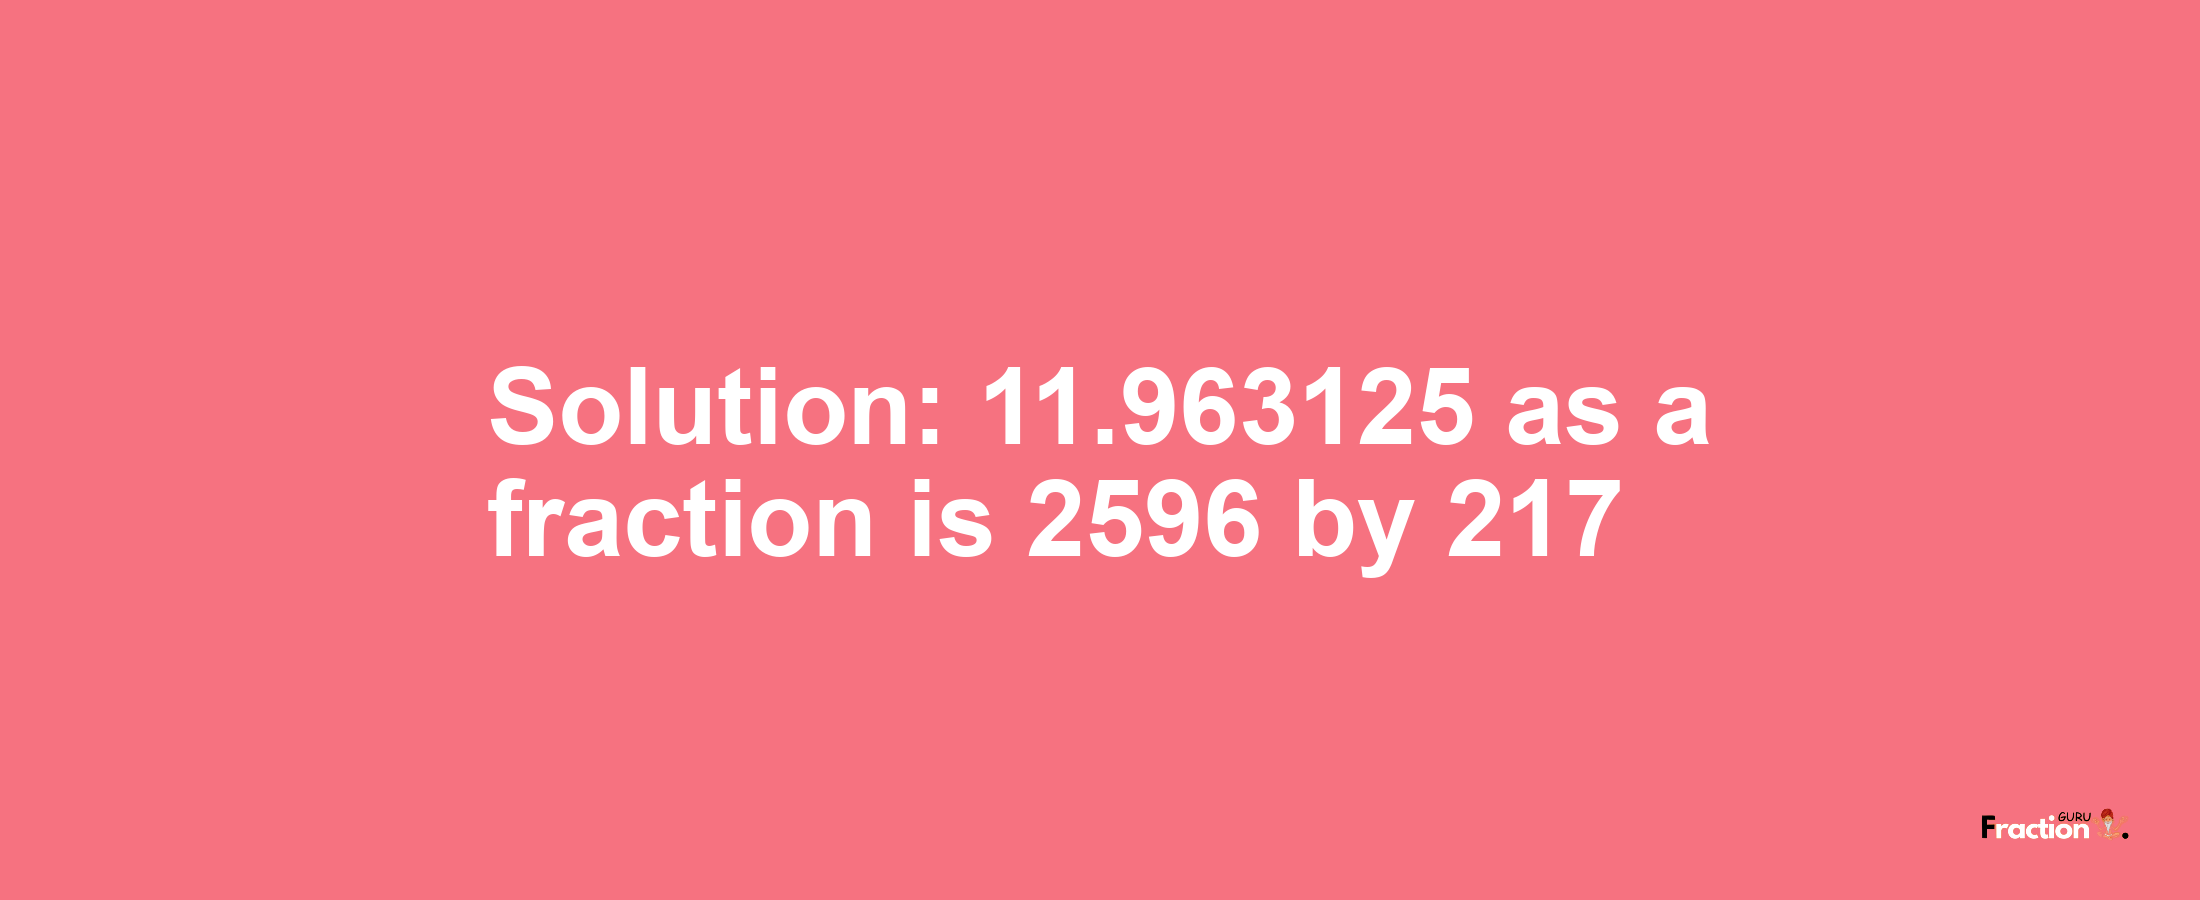 Solution:11.963125 as a fraction is 2596/217